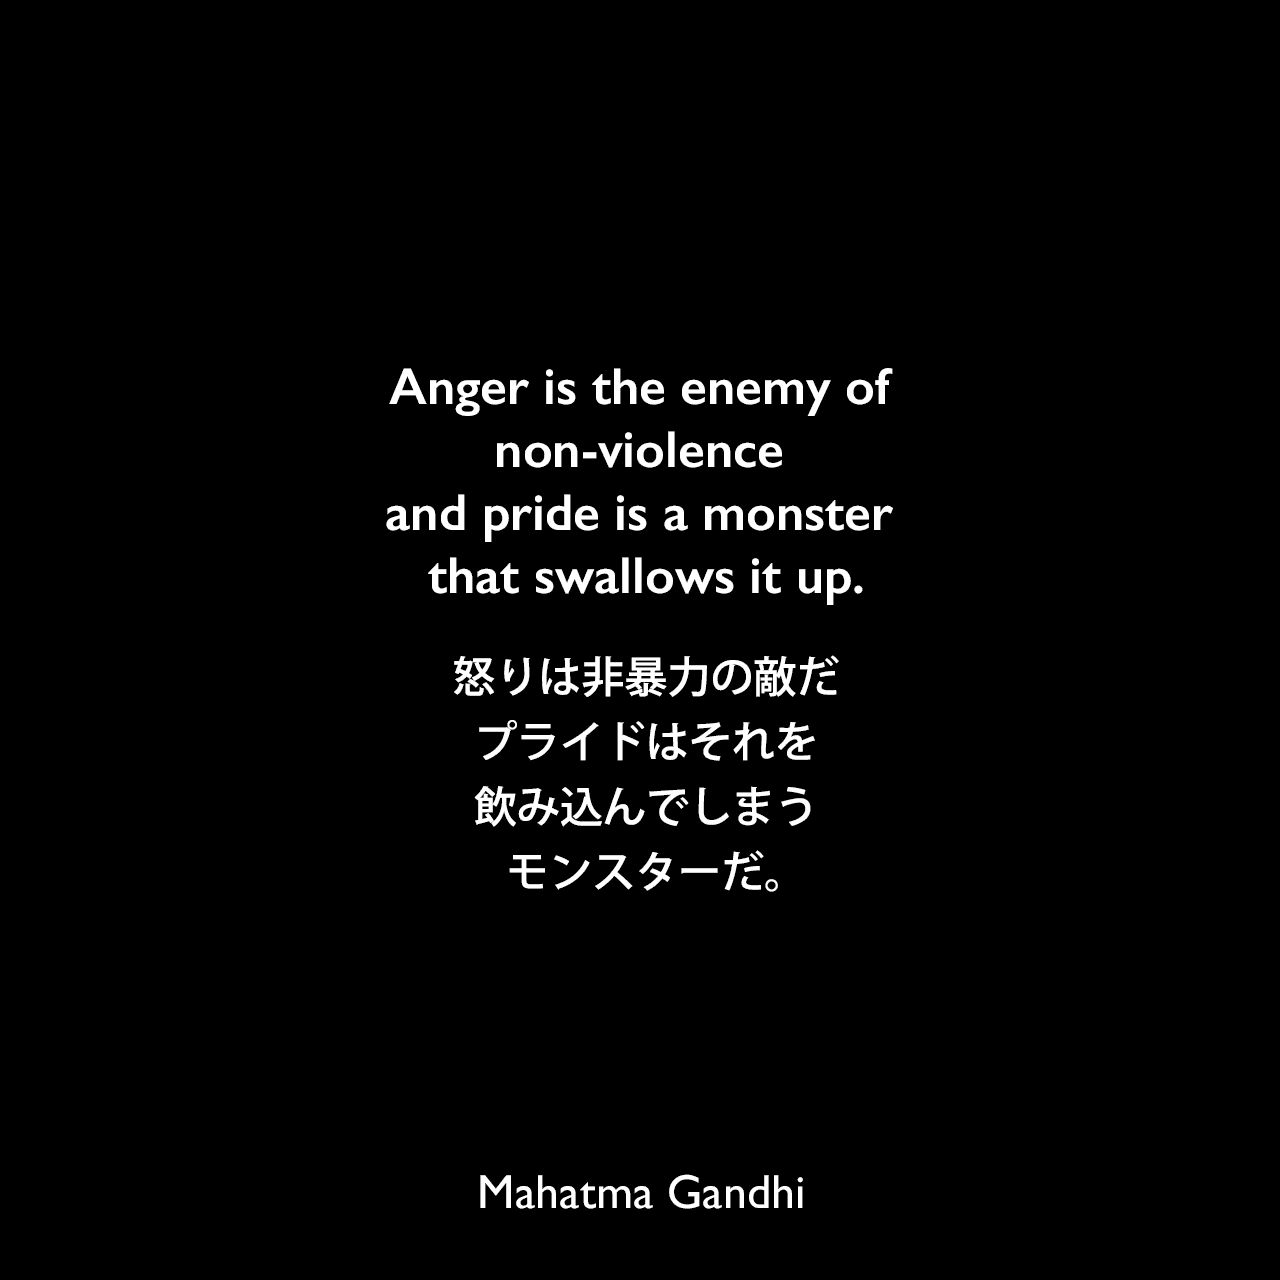 Anger is the enemy of non-violence and pride is a monster that swallows it up.怒りは非暴力の敵だ、プライドはそれを飲み込んでしまうモンスターだ。Mahatma Gandhi